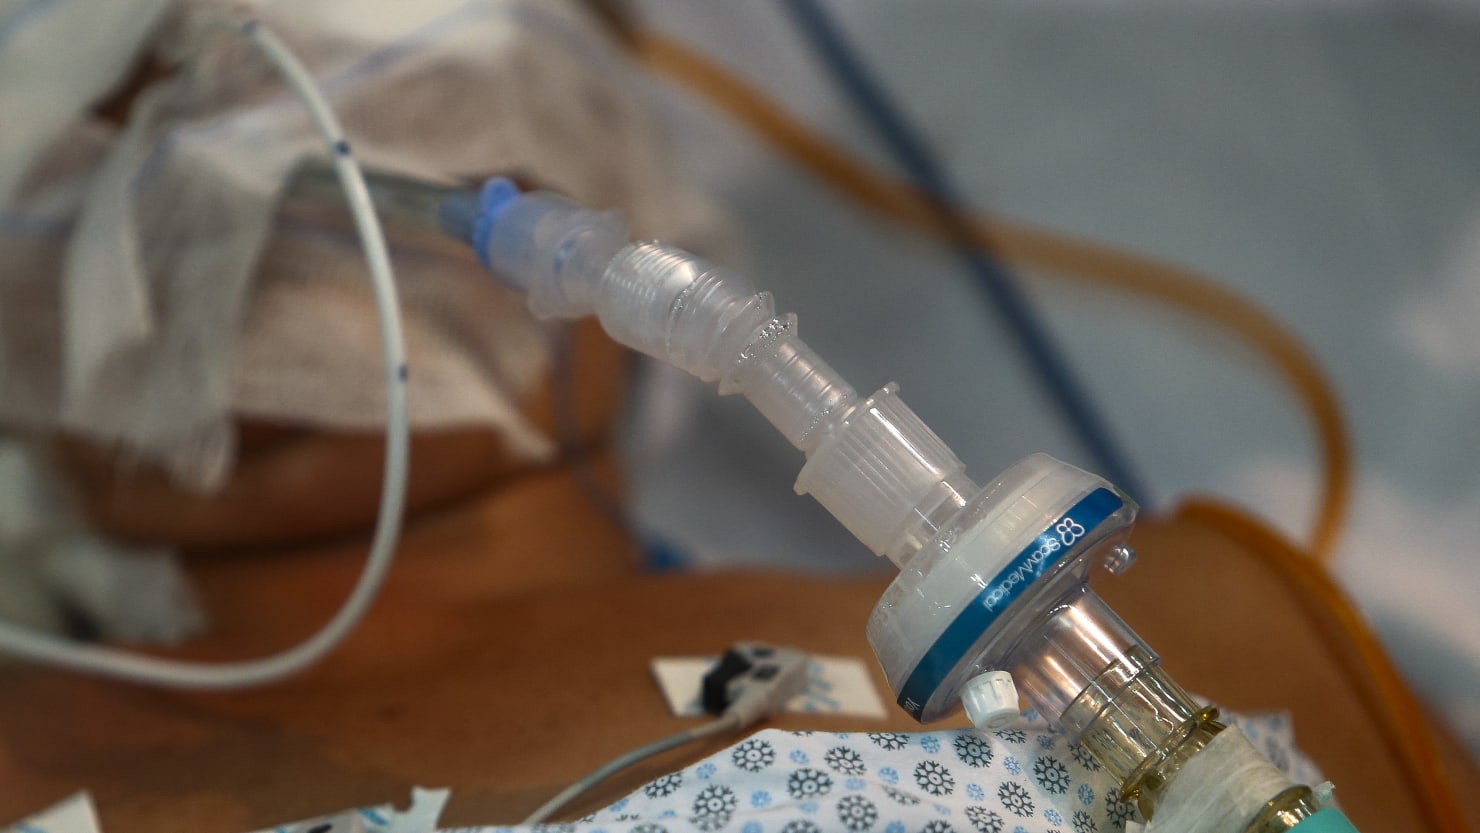 COVID patients in Brazil tied to beds and ventilated without sedatives